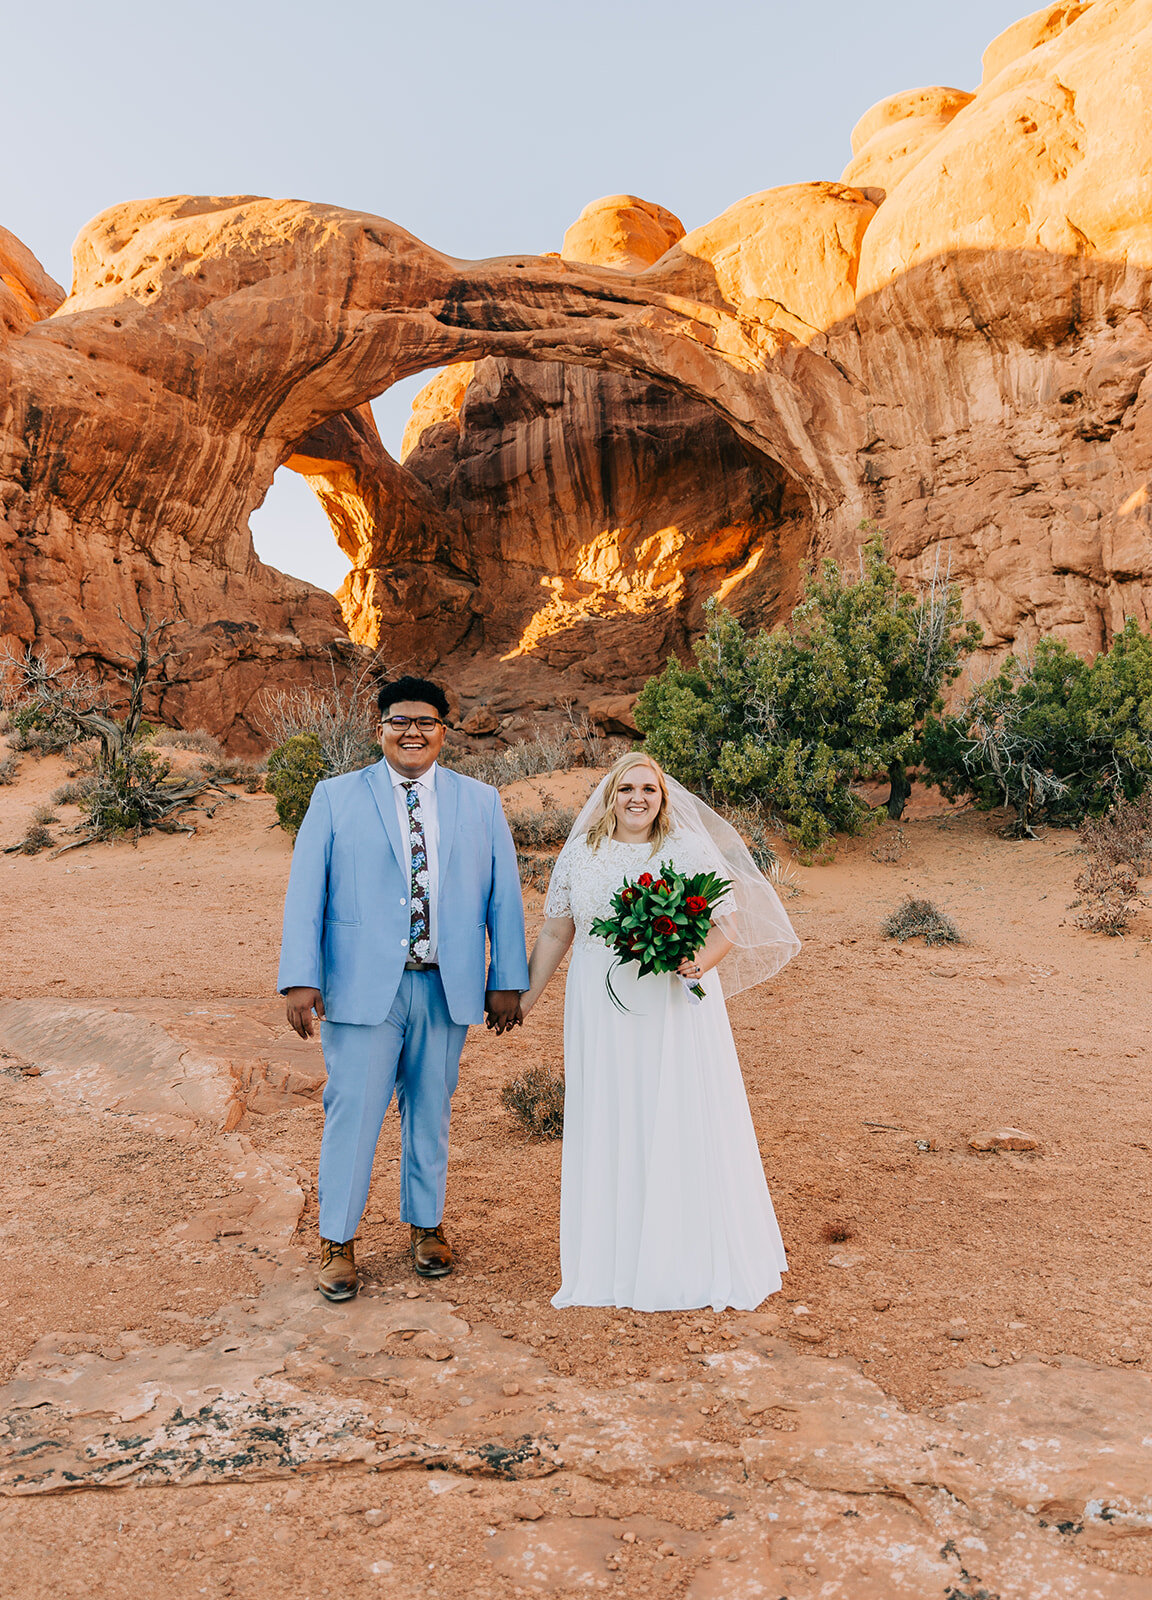  bride and groom standing and holding hands pose inspiration desert moab utah powder blue suit groom fashion bridal fashion modest wedding dress white dress veil bouquet inspiration double arch elephant rock professional photographers in utah utah we